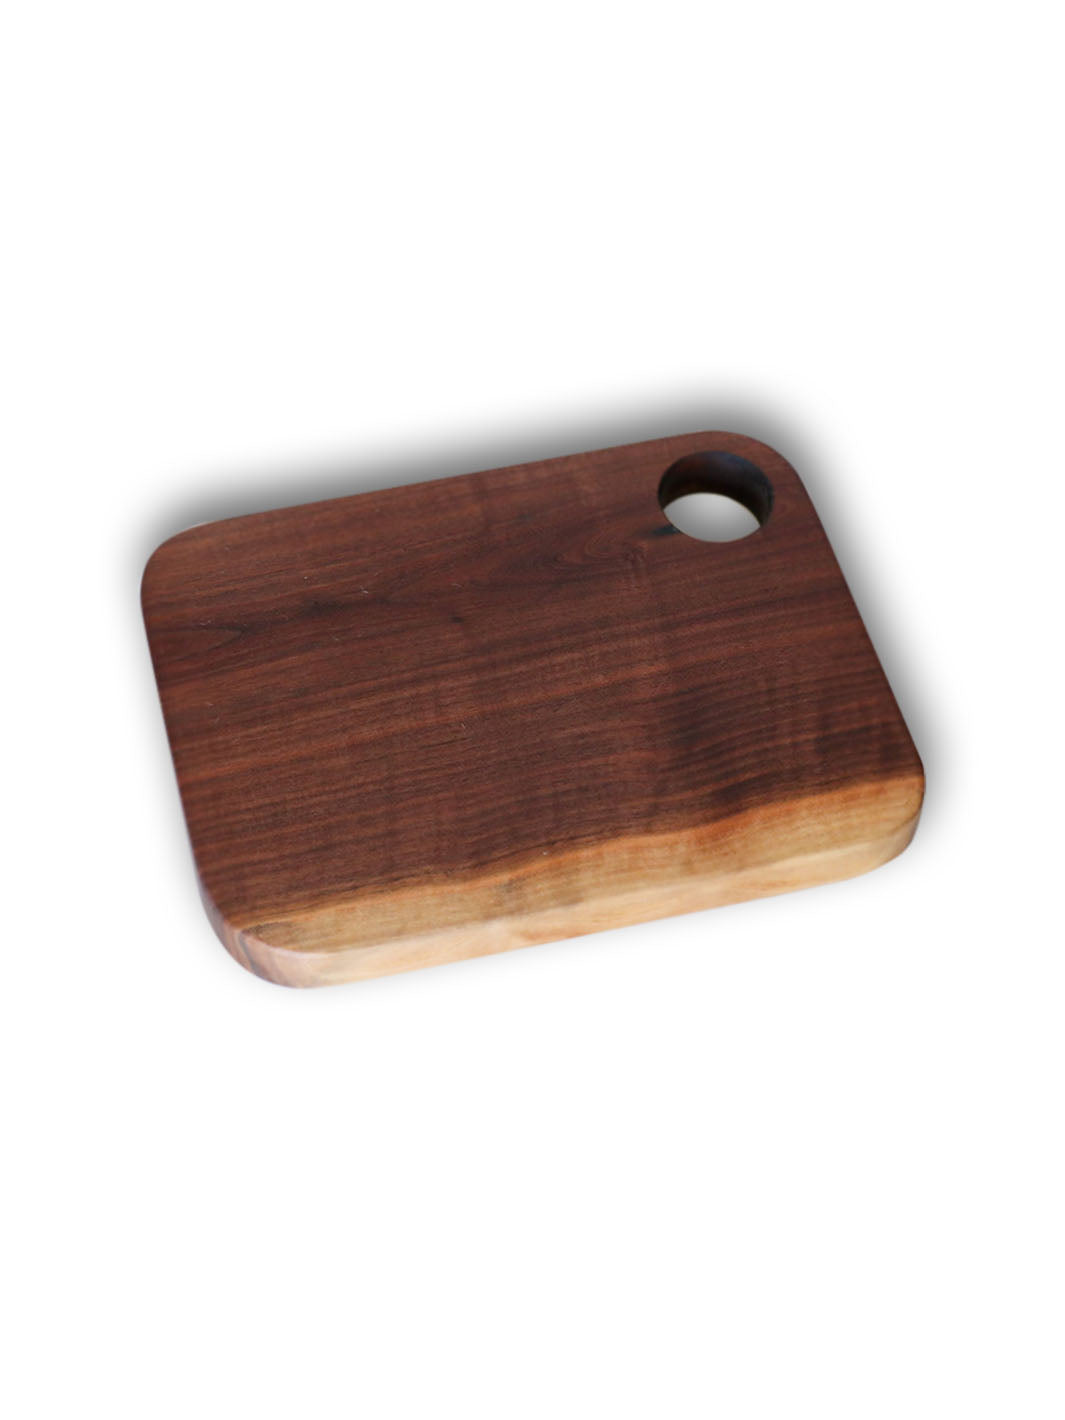 Earthly Comfort Small Walnut Live Edge Cutting Board Earthly Comfort Cutting Board 1804